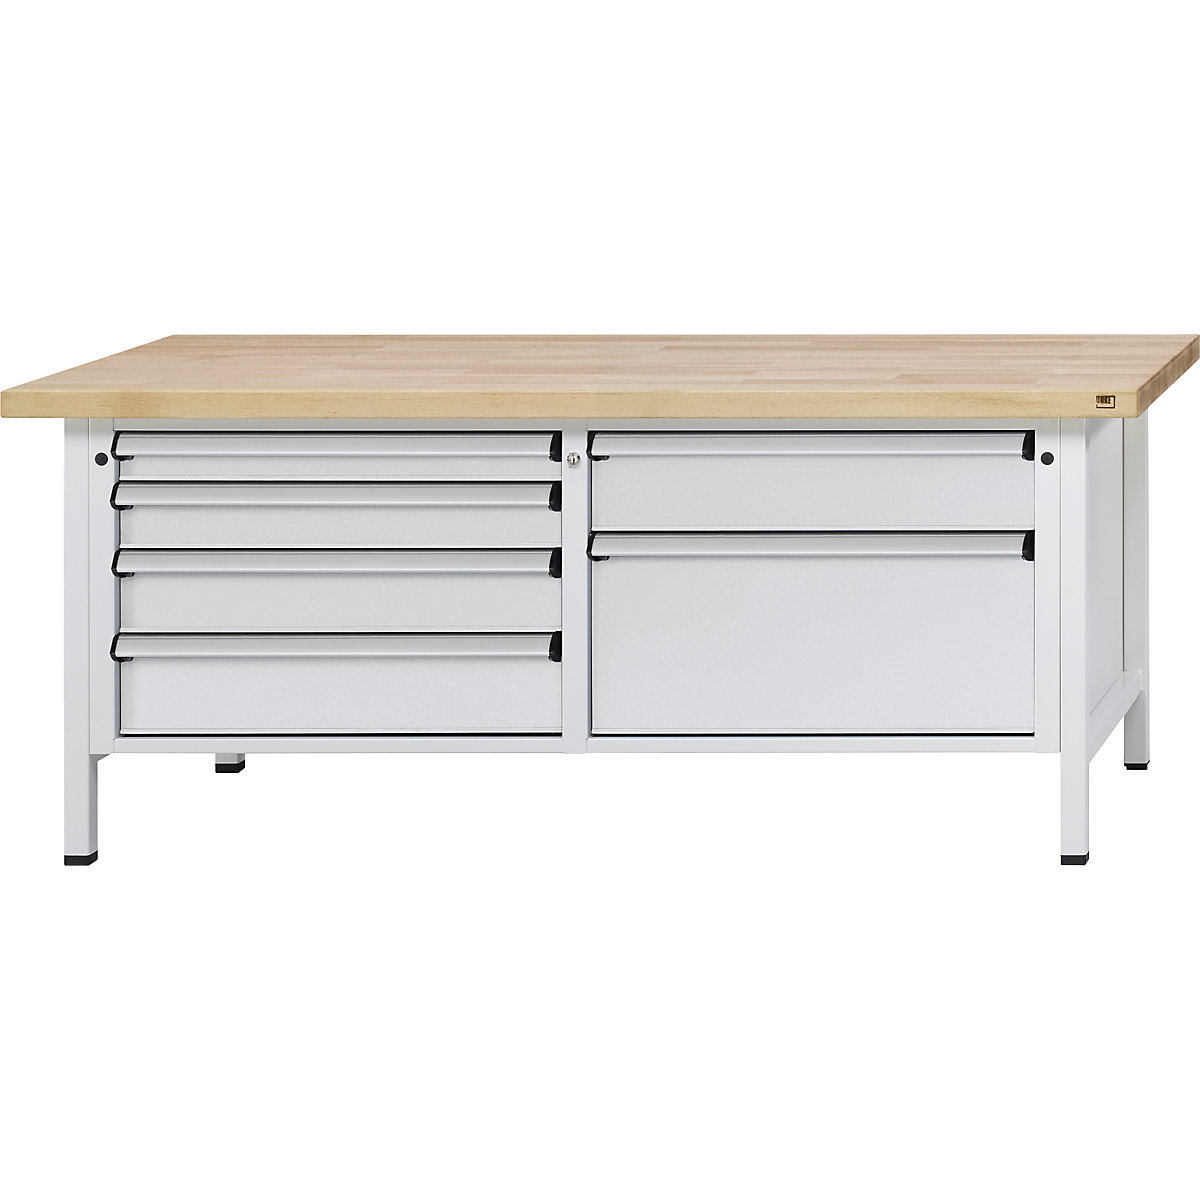 Workbench with XL/XXL drawers, frame construction – ANKE, width 2000 mm, 6 drawers, solid beech worktop, front in light grey-13